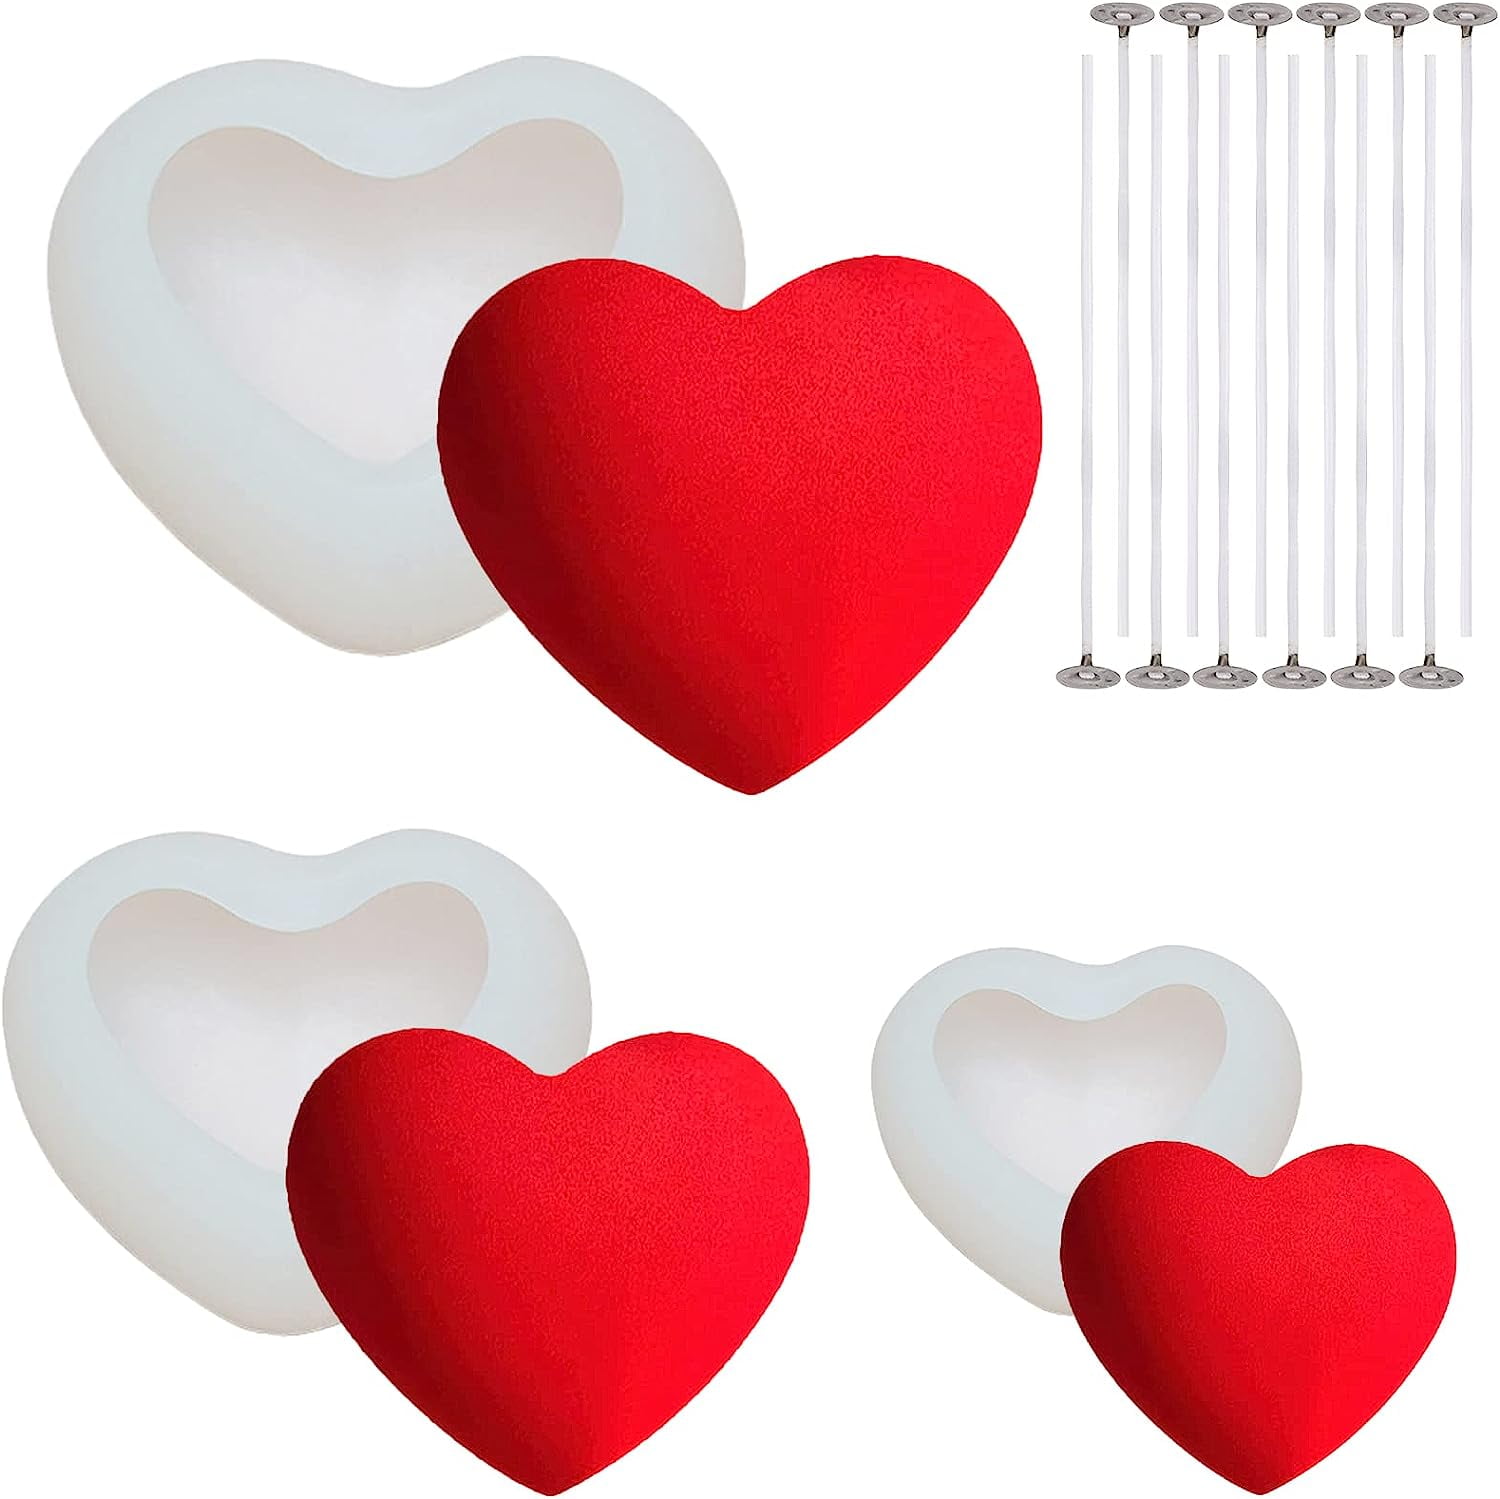 3D Heart Shaped Candle Mold Silicone Love Heart Mold DIY -   Homemade  aromatherapy candles, Diy aromatherapy candles, Candle molds diy